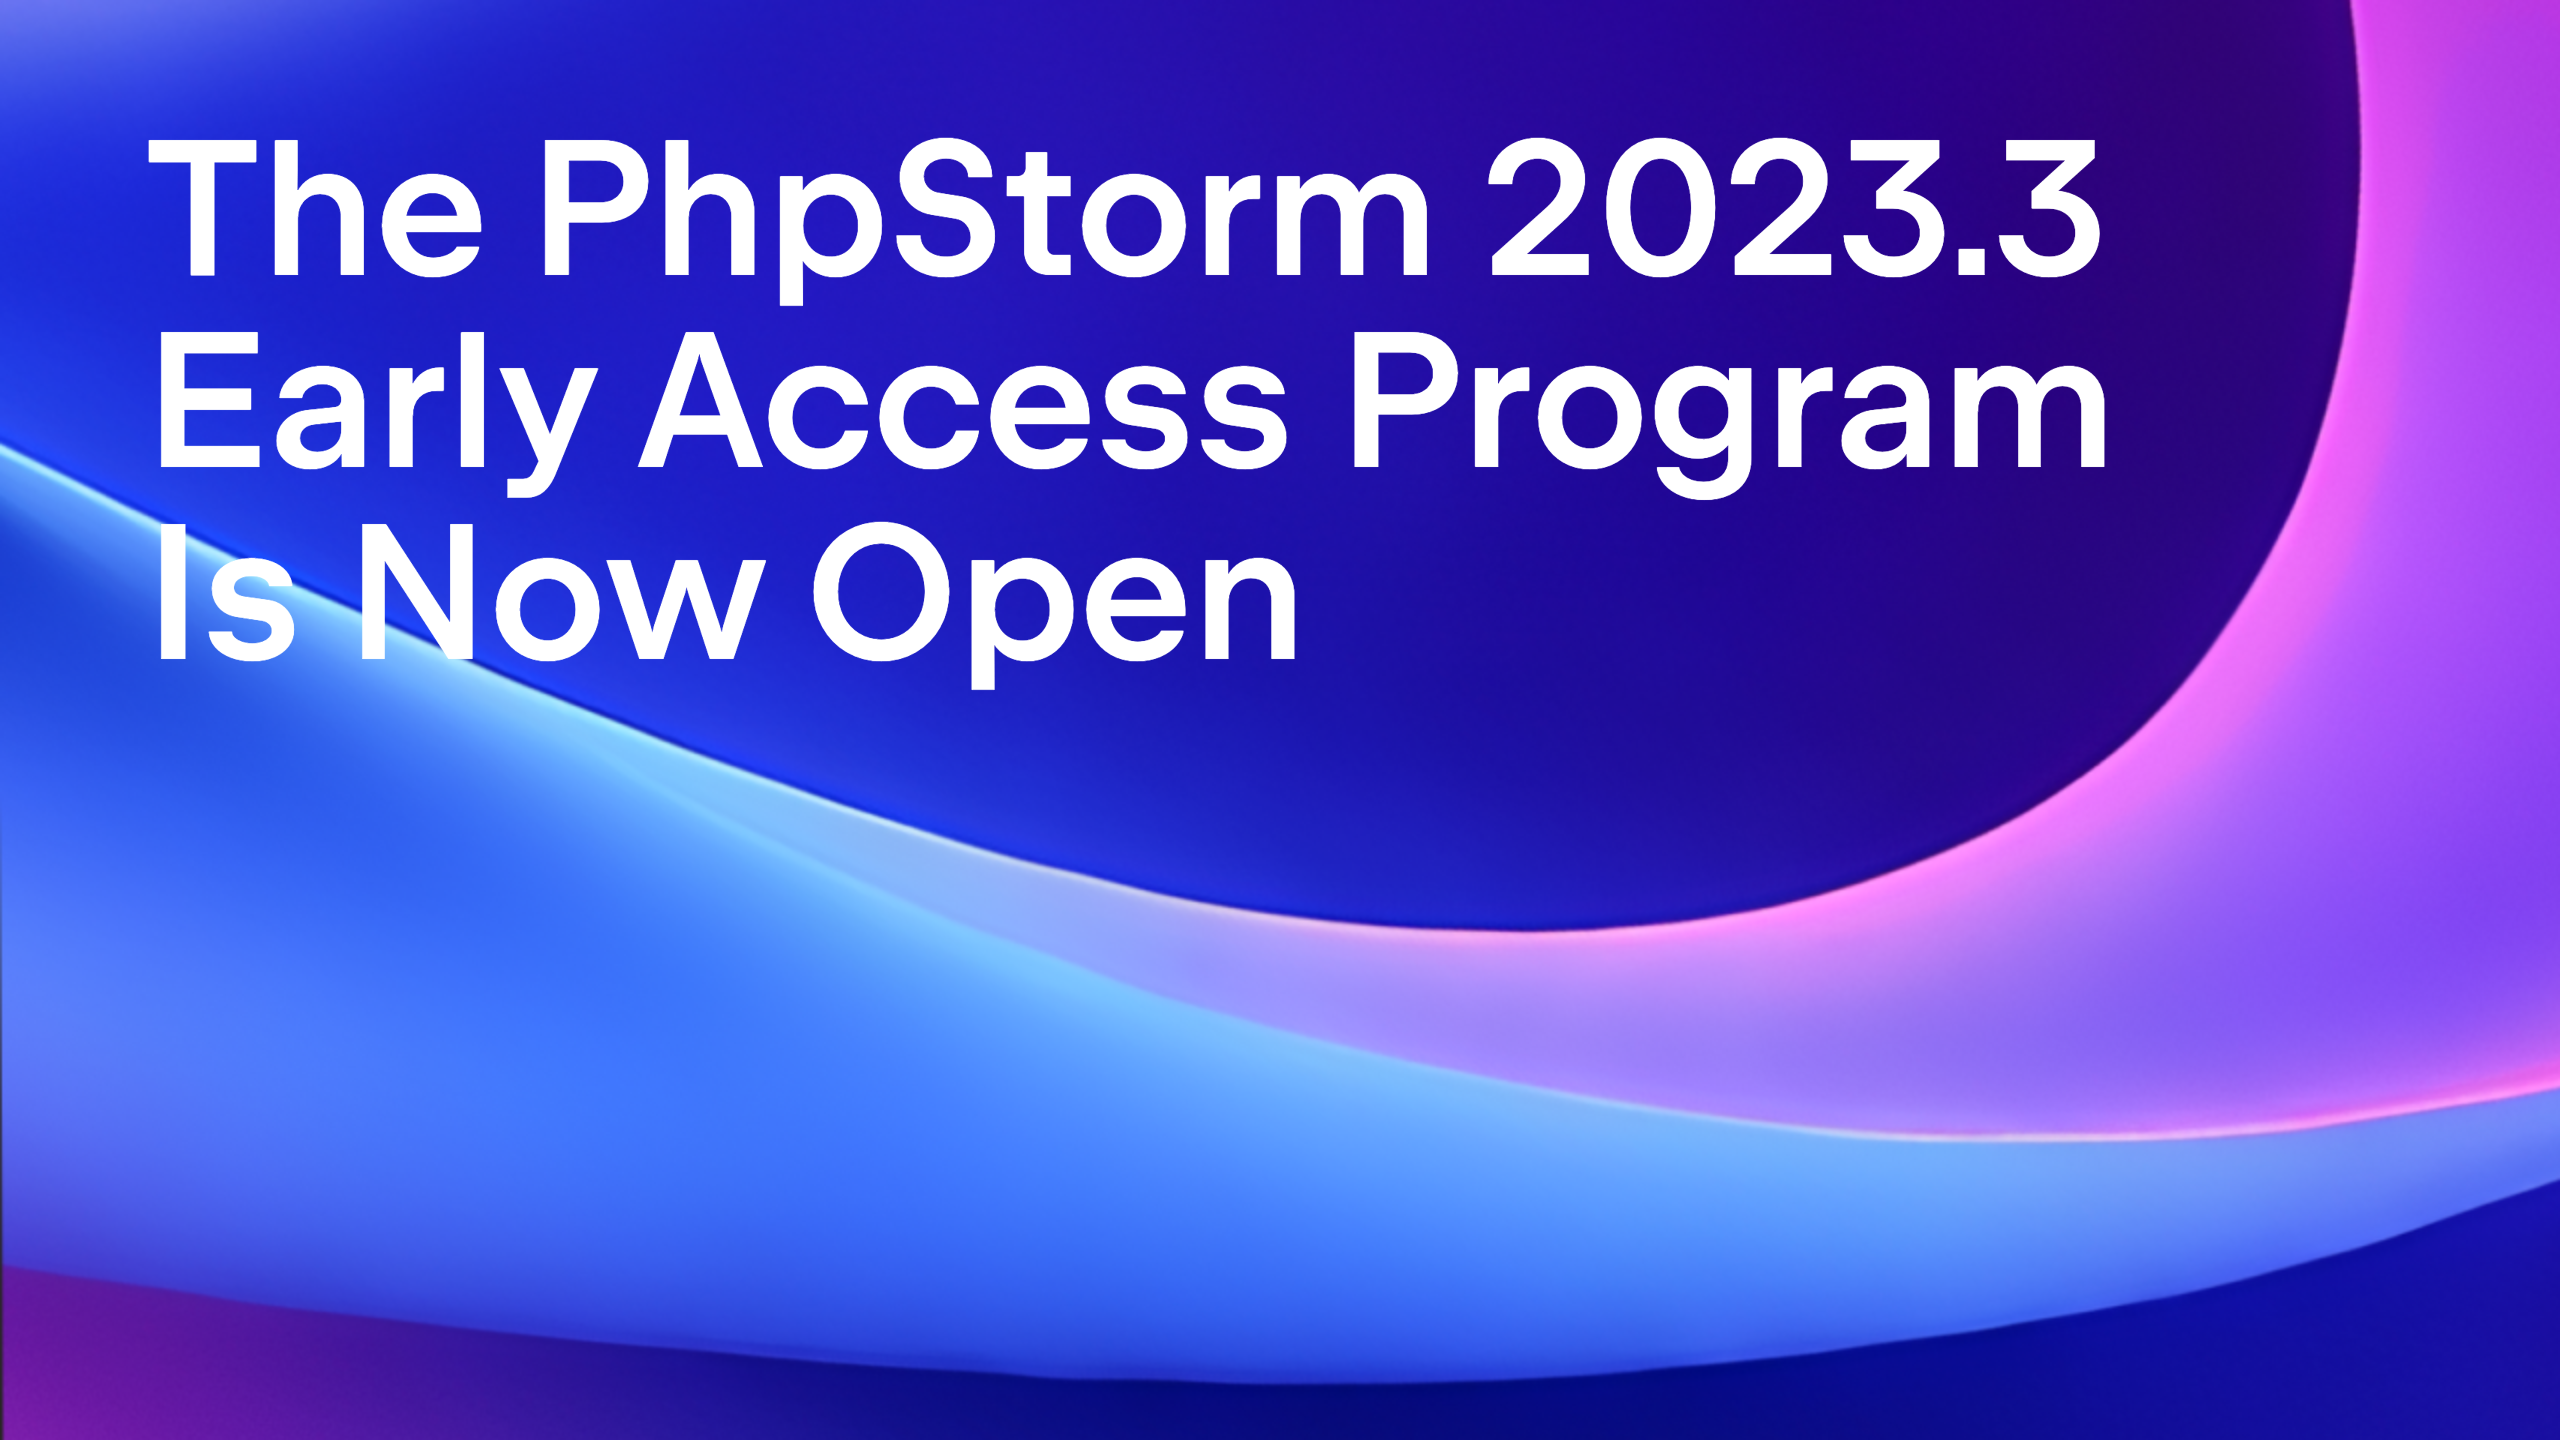 The PhpStorm 2023.3 Early Access Program Is Now Open